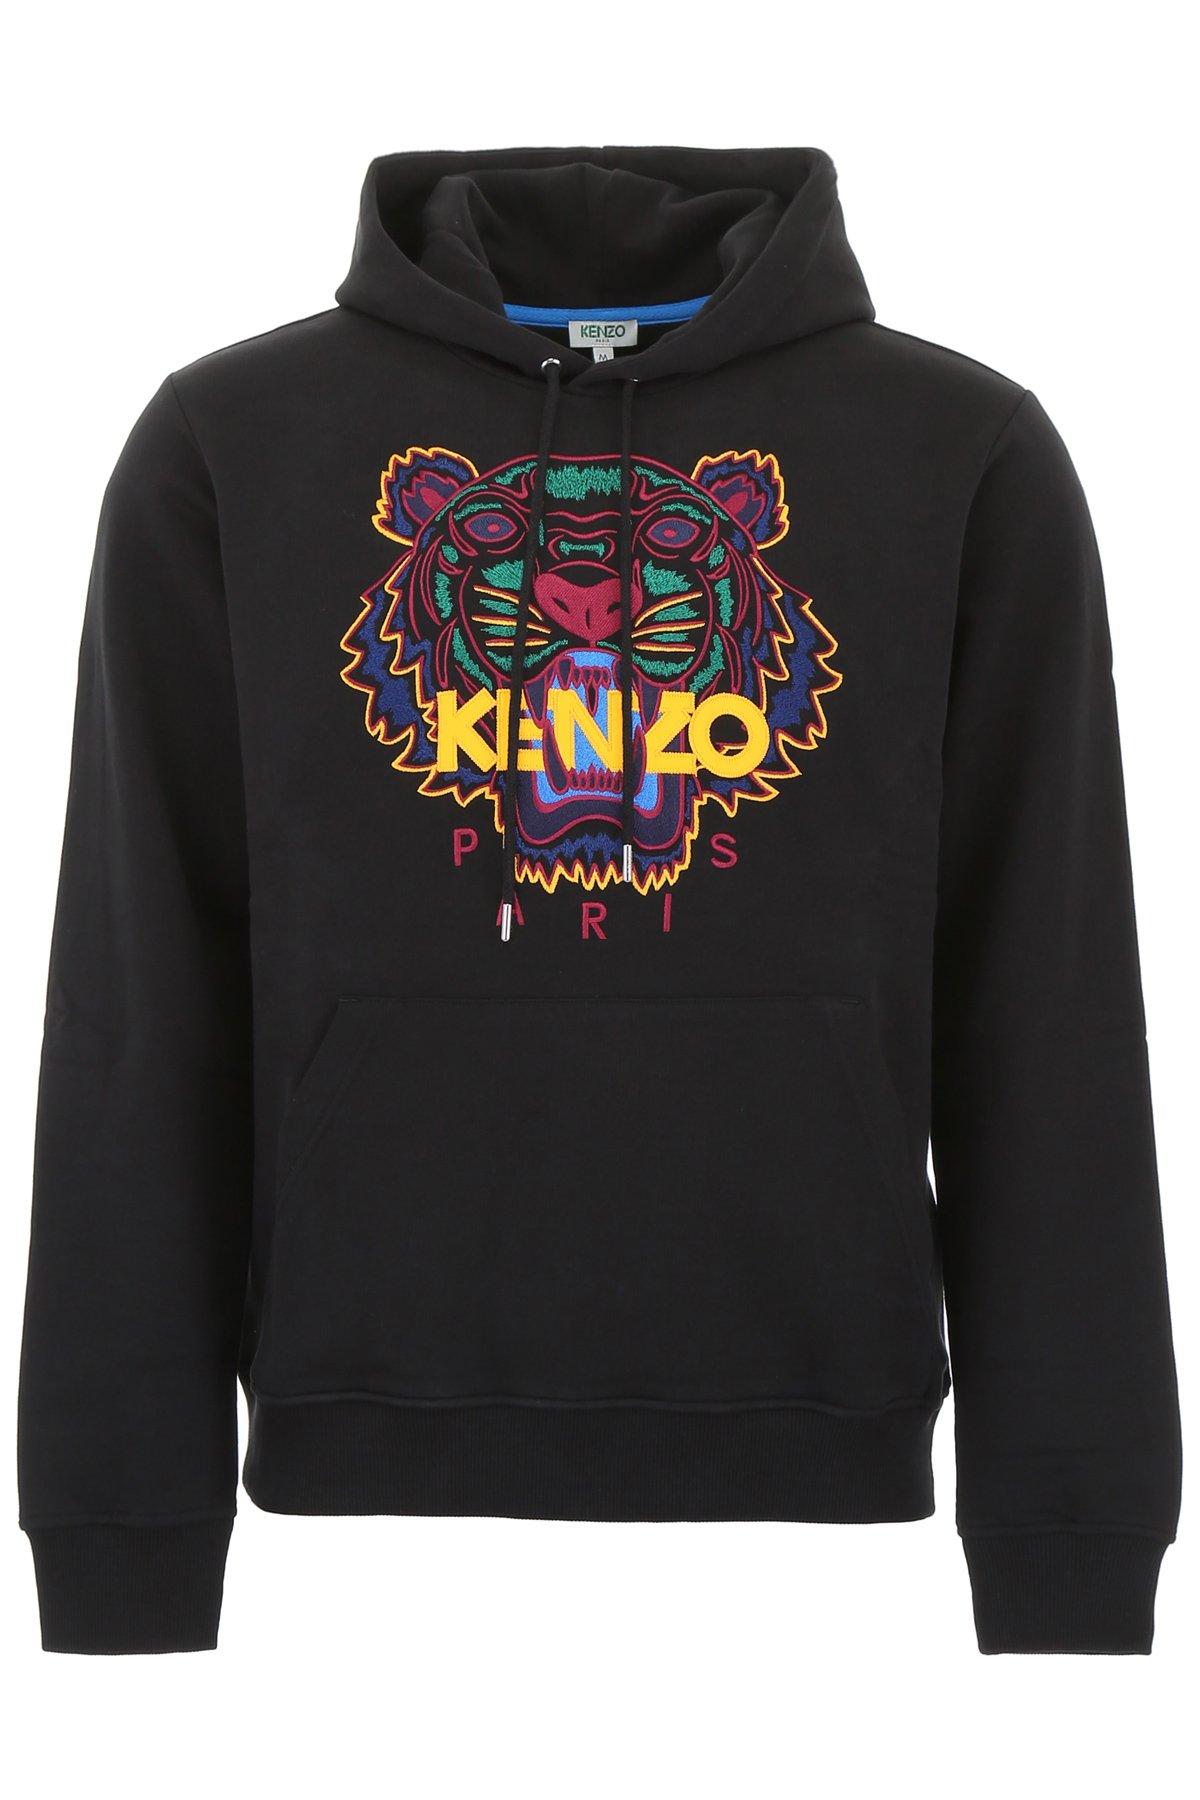 KENZO Tiger Logo Embroidered Hoodie in Black for Men - Lyst